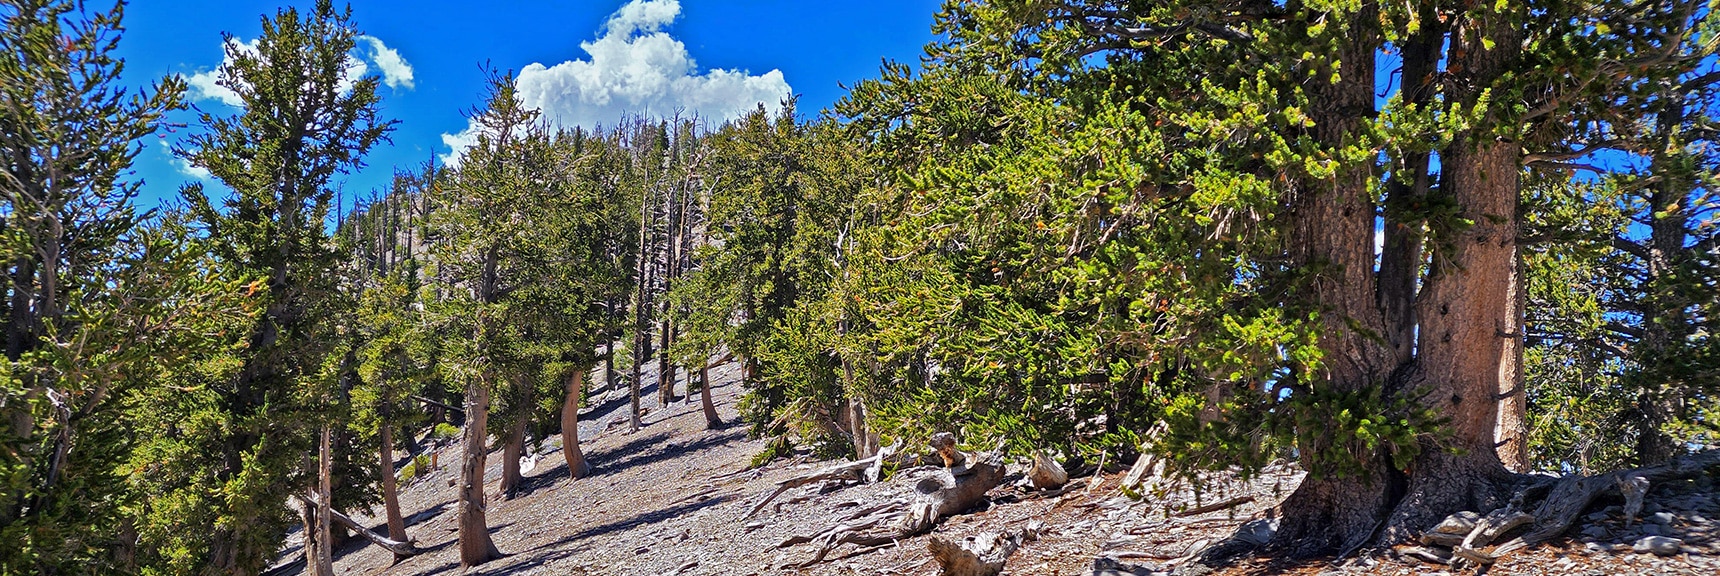 Many Stretches Along the Lee/Kyle Canyon Upper Ridgeline are Wide-Open Easy | Mummy Mountain Grand Crossing | Lee Canyon to Deer Creek Road | Mt Charleston Wilderness | Spring Mountains, Nevada |